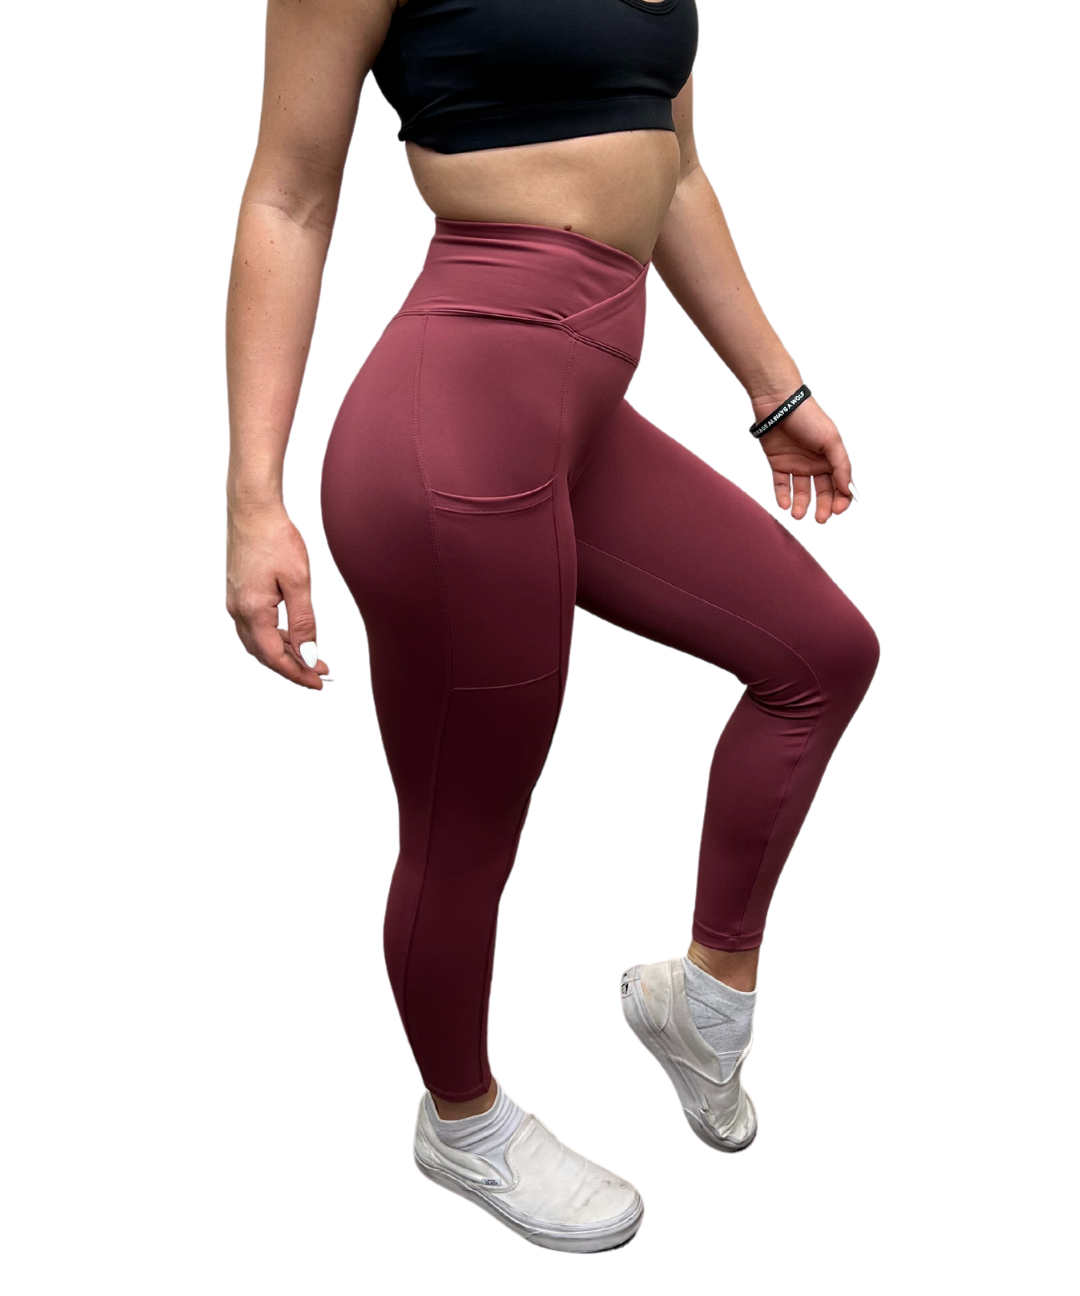 Alphalete review: This gym apparel is comfortable and stylish